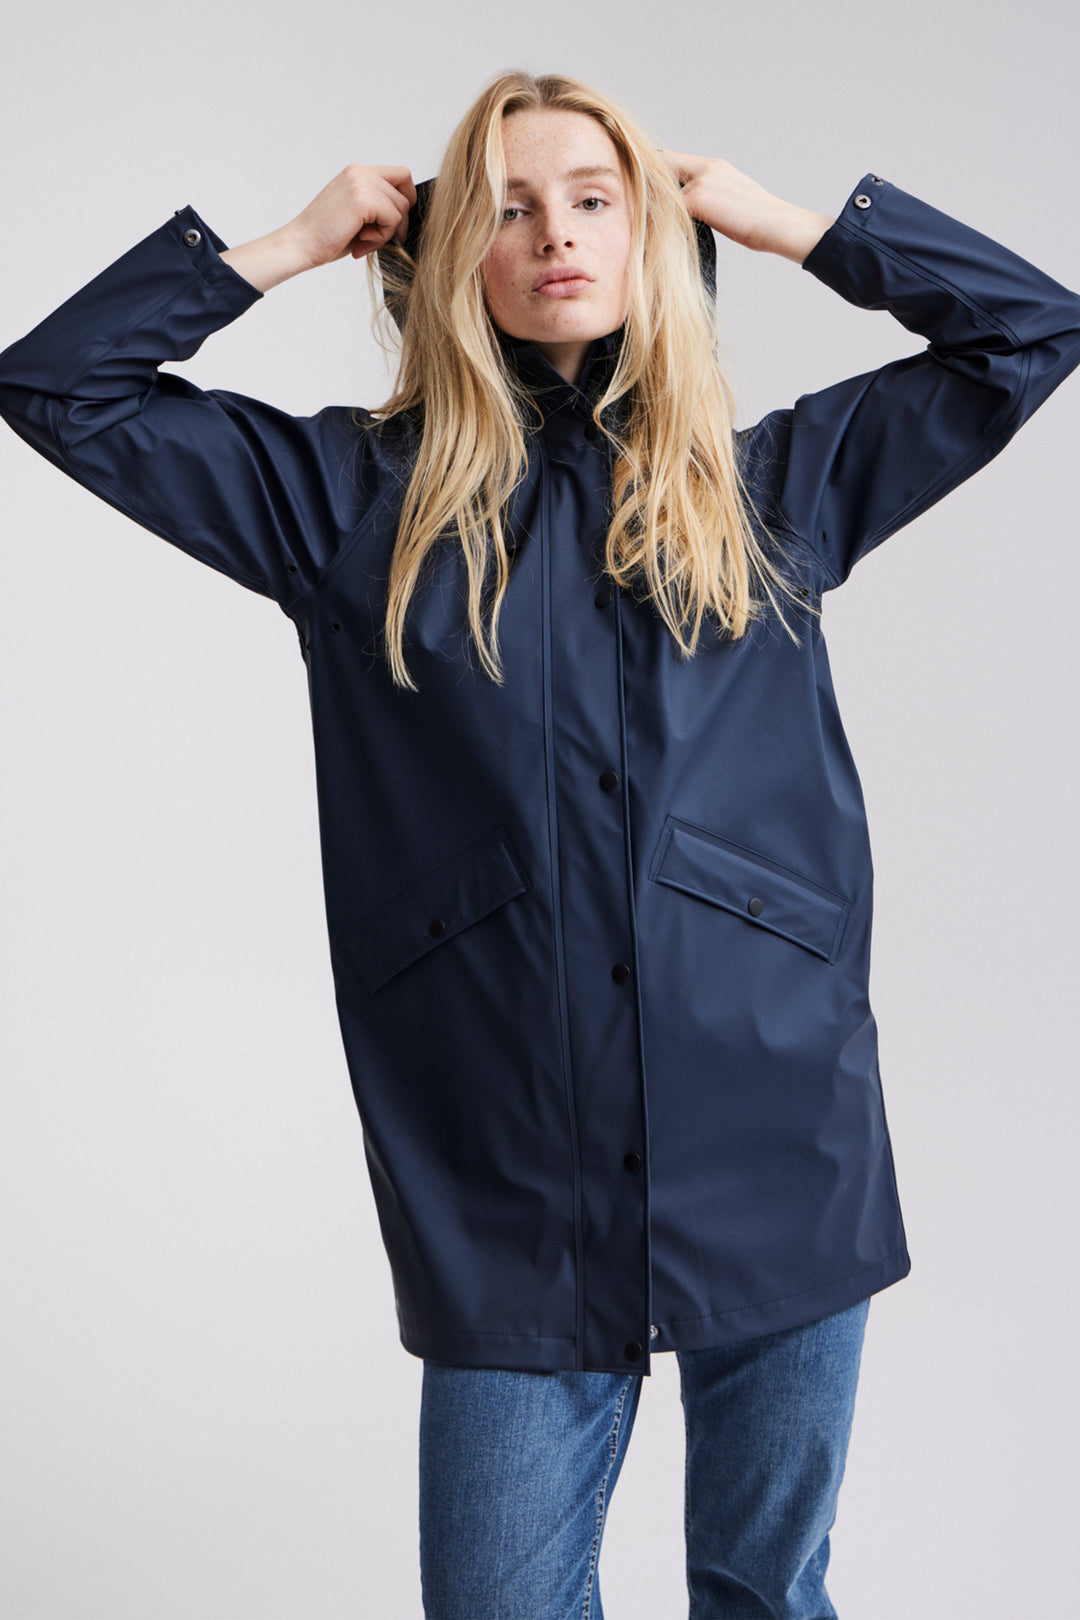 Crafted with a simple yet stylish design, the jacket features a hood, two front pockets, buttons and an above the knee length.